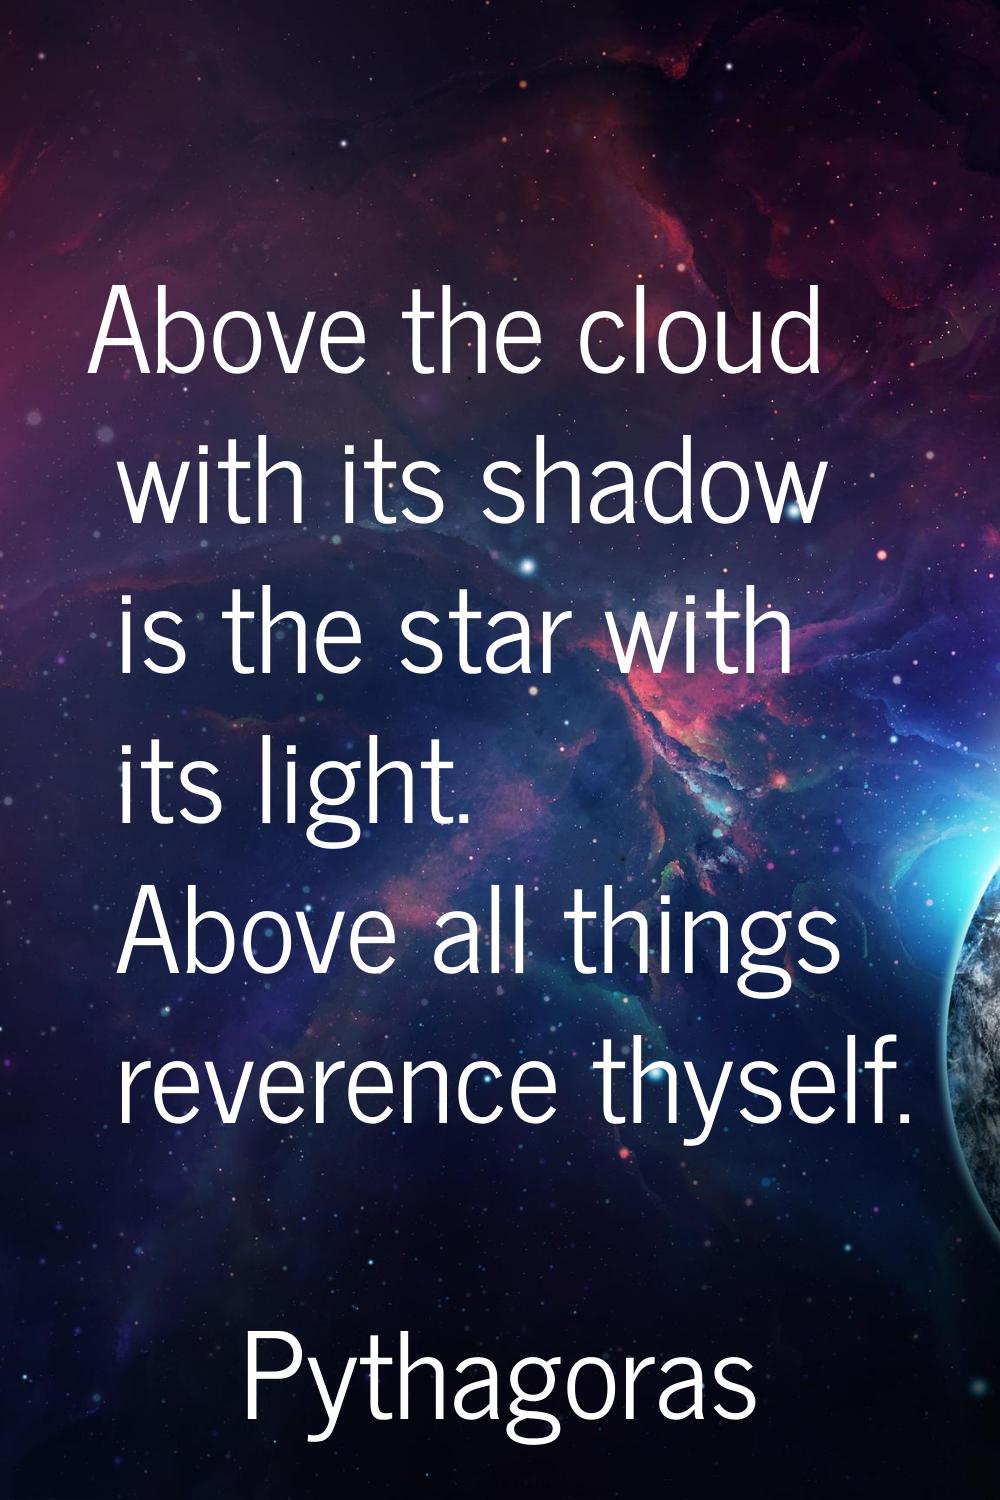 Above the cloud with its shadow is the star with its light. Above all things reverence thyself.